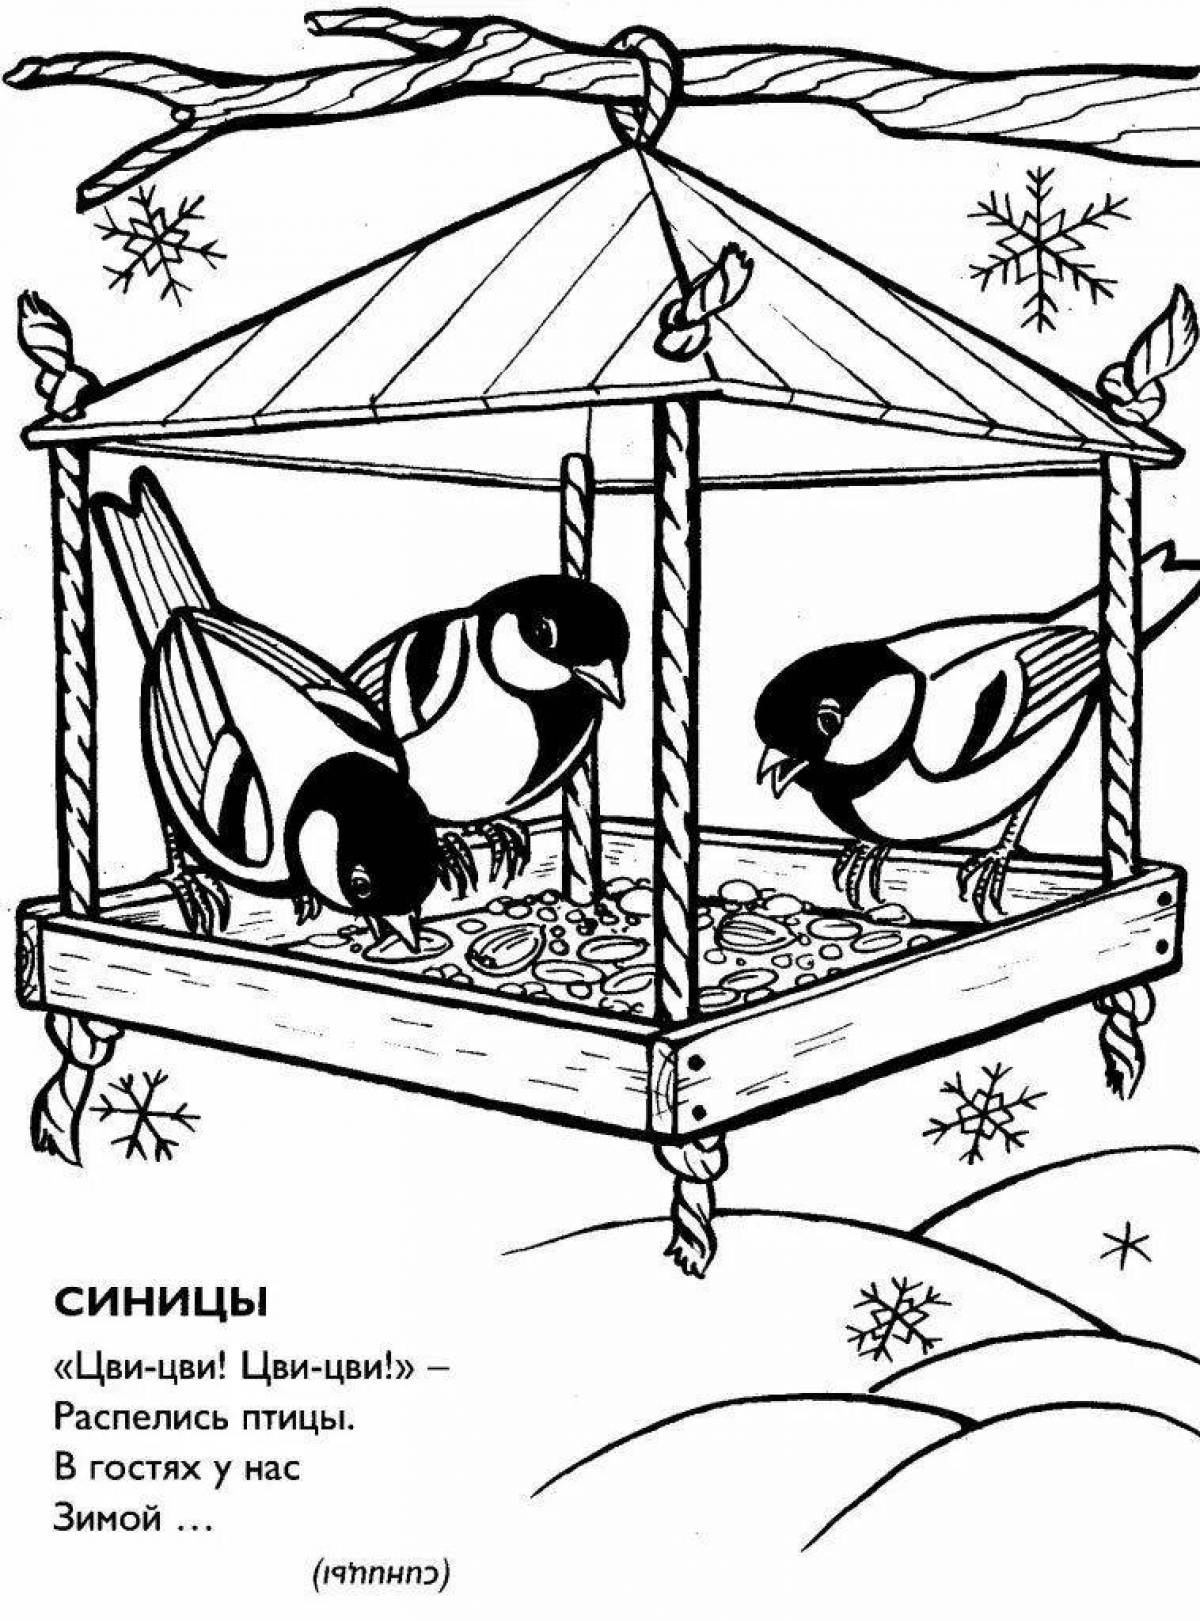 Adorable bird feeder coloring pages for kids in winter